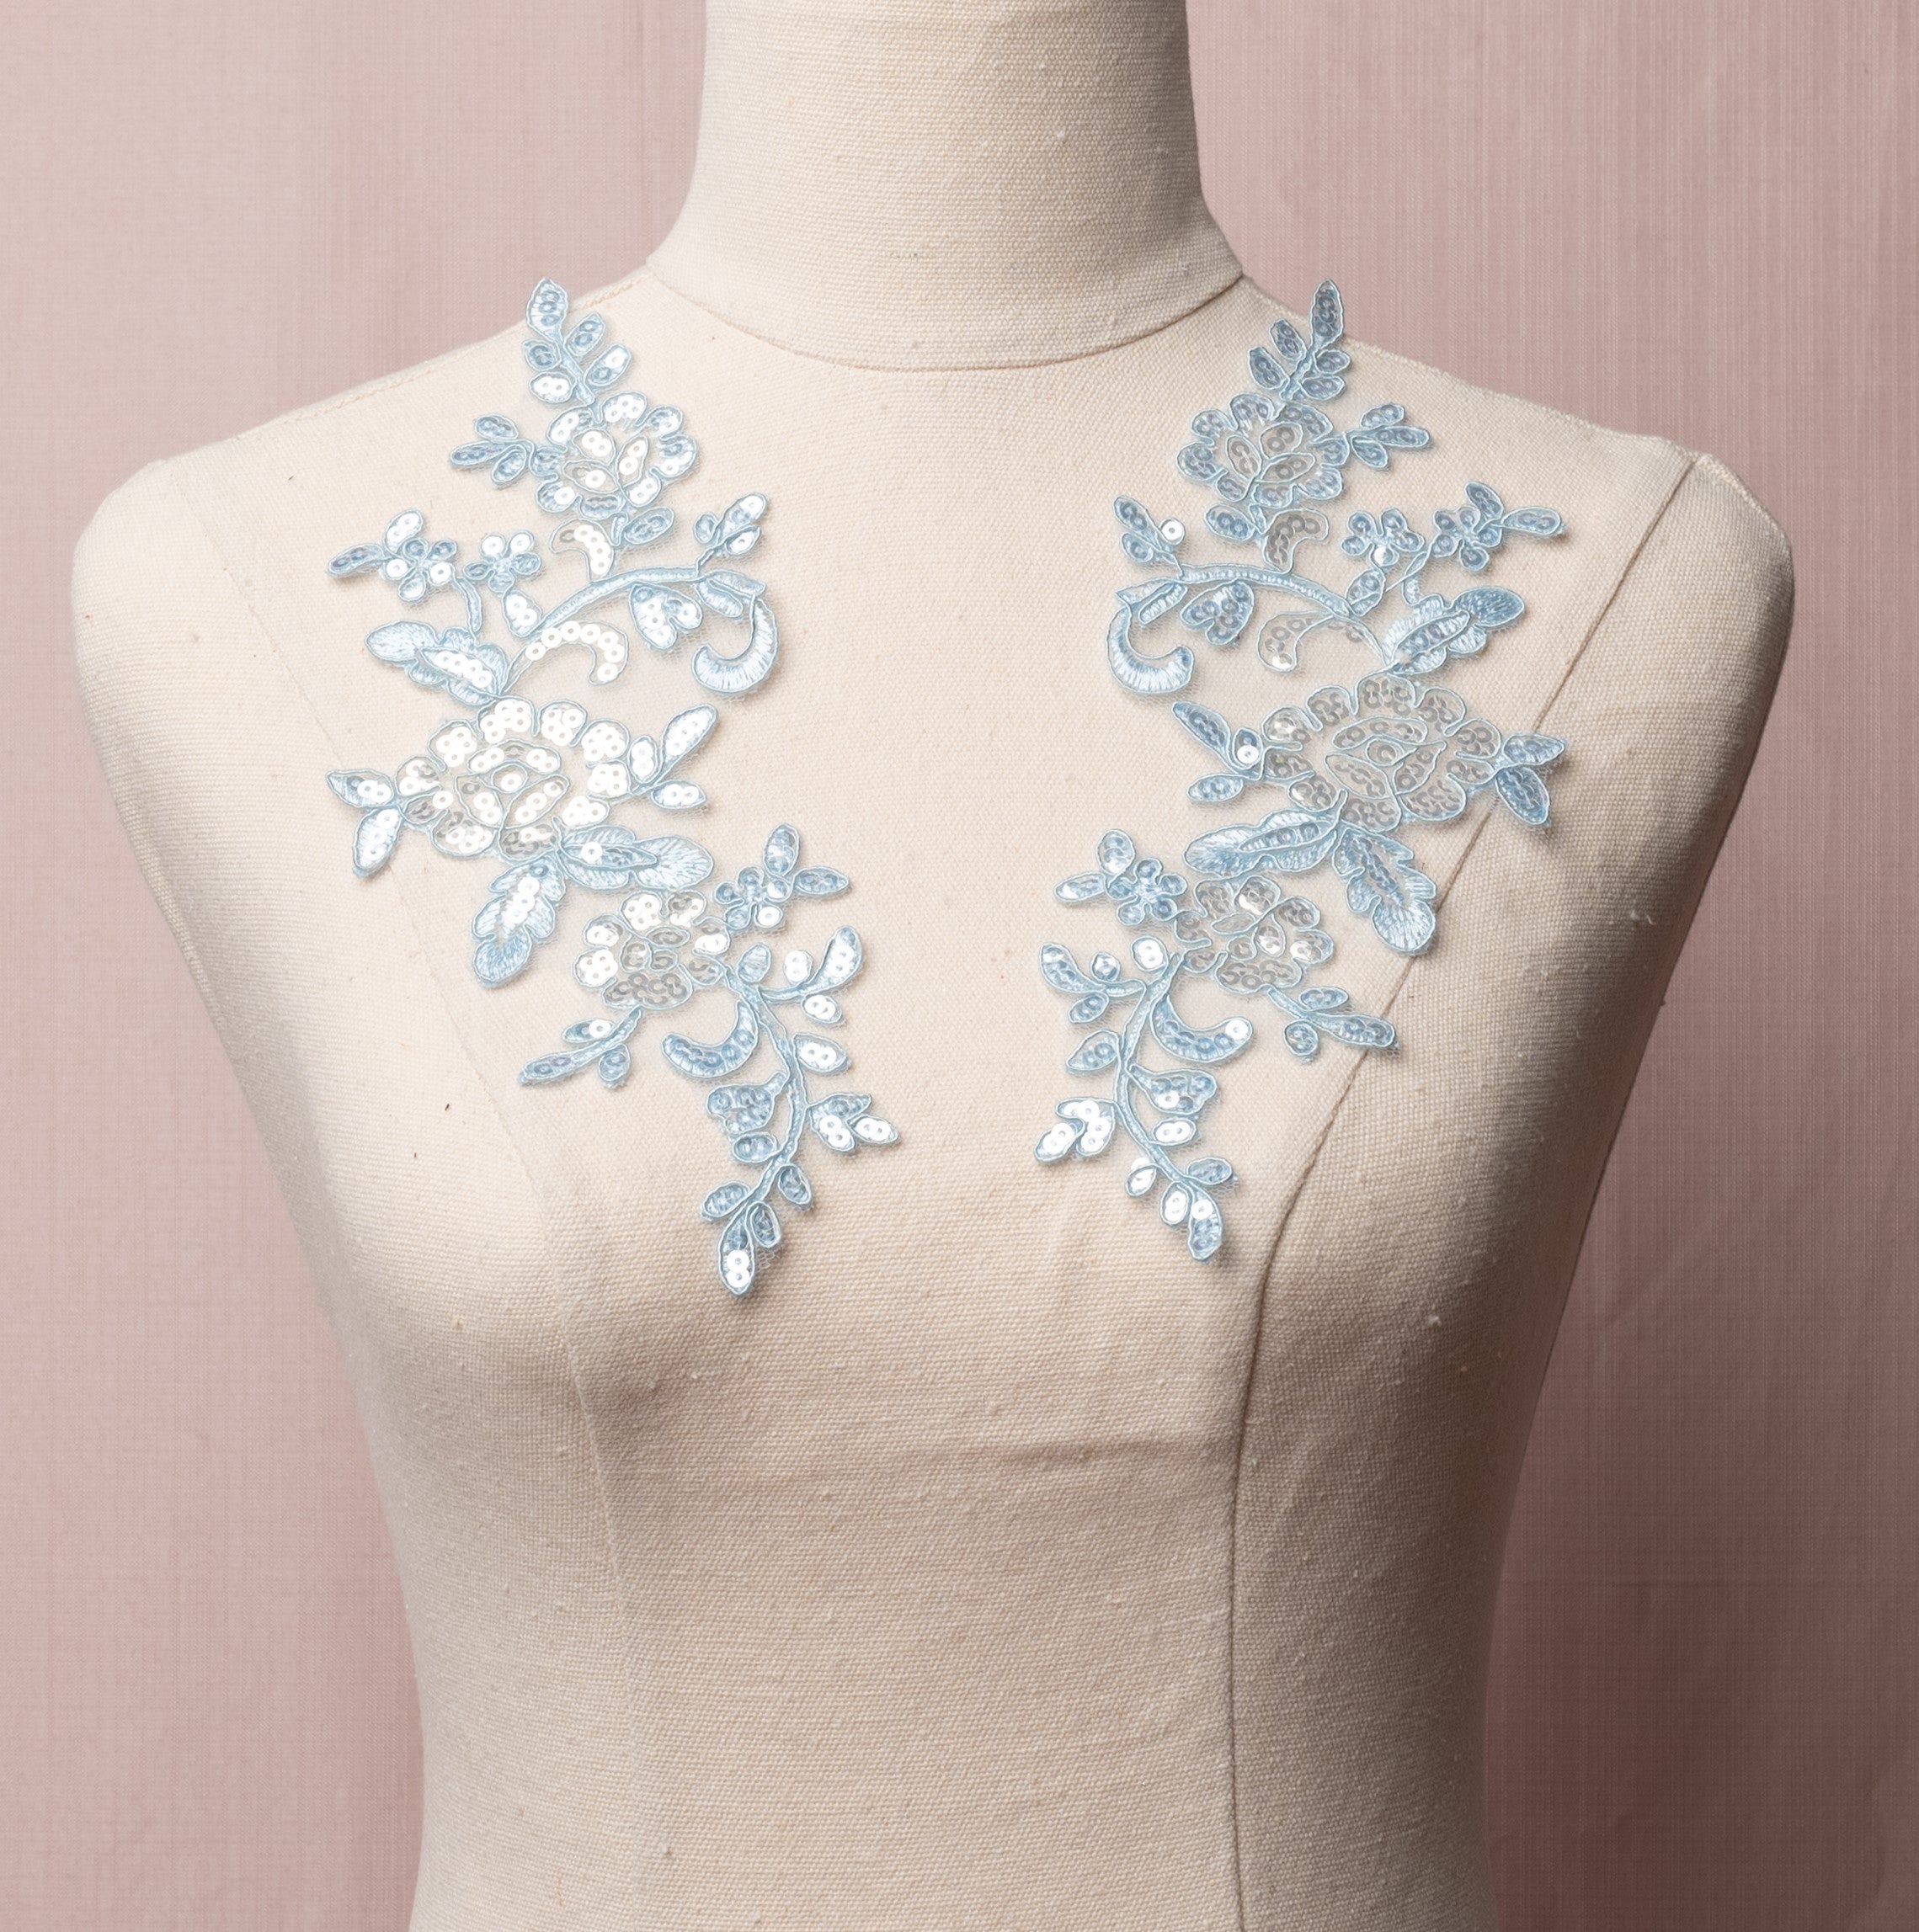 Pale blue embroidered and corded floral patterned applique pair covered with sequins.  The appliques are displayed on a mannequin.